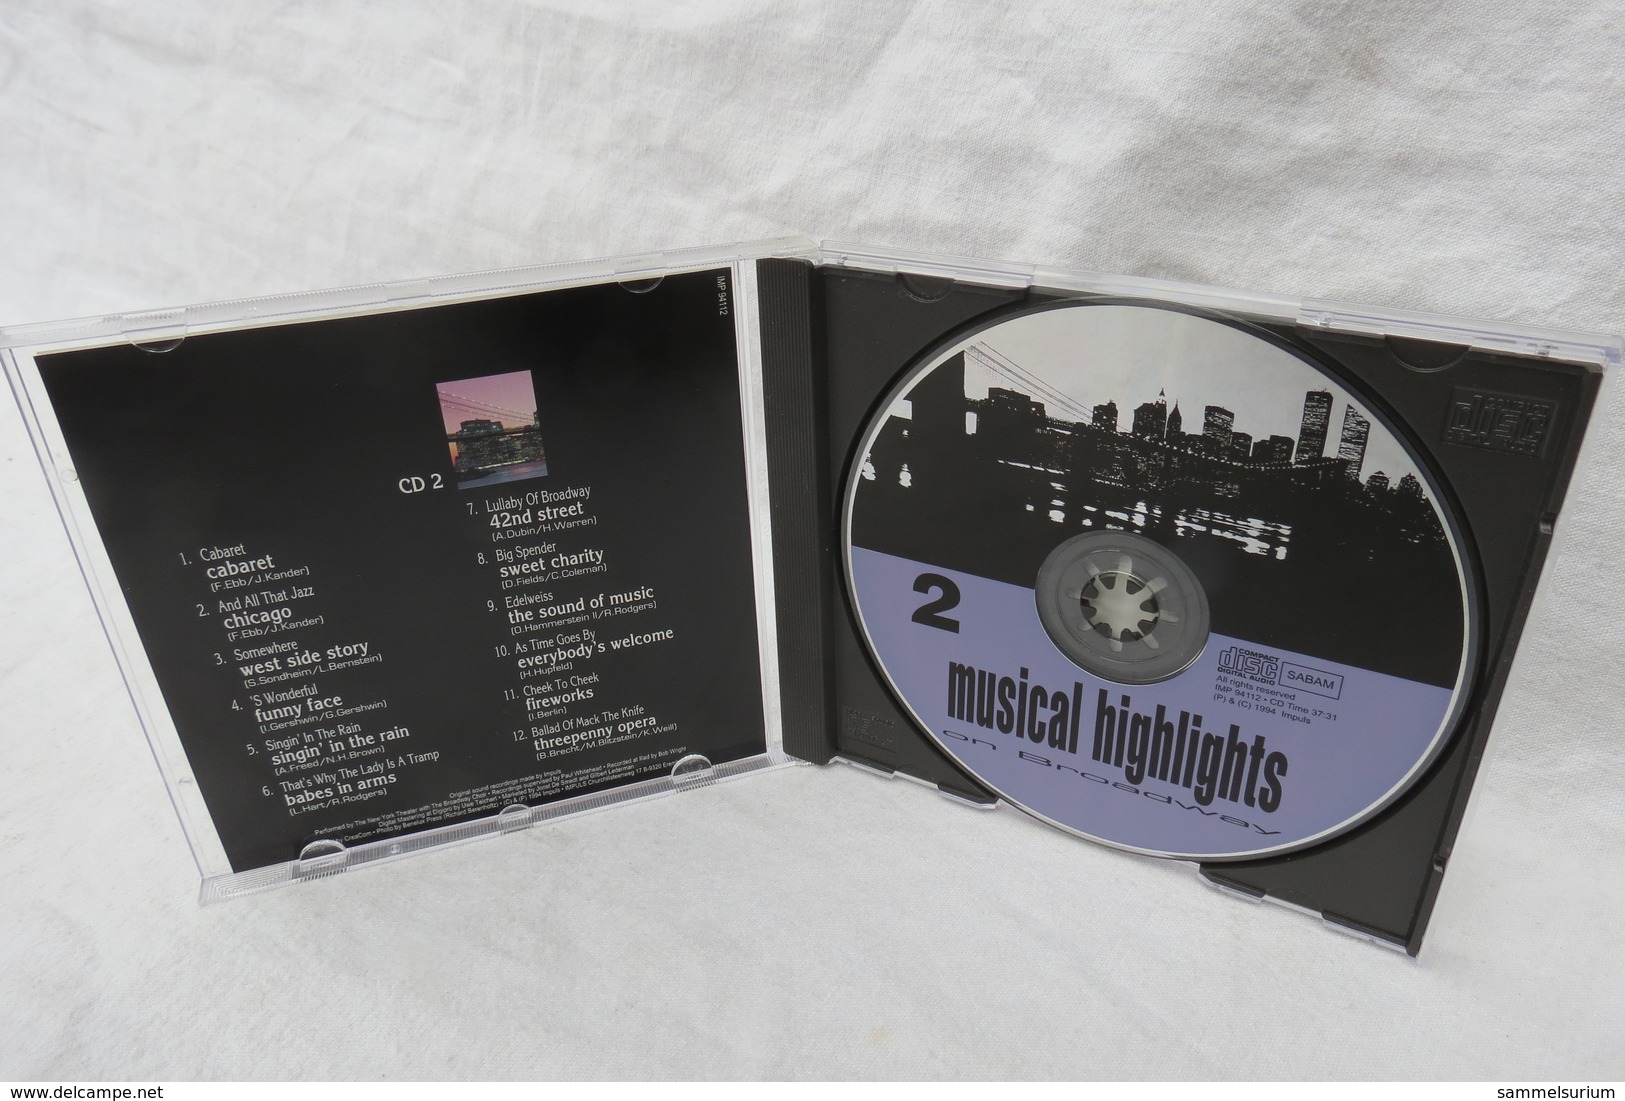 CD "Musical Highlights On Broadway" CD 2 - Musicals